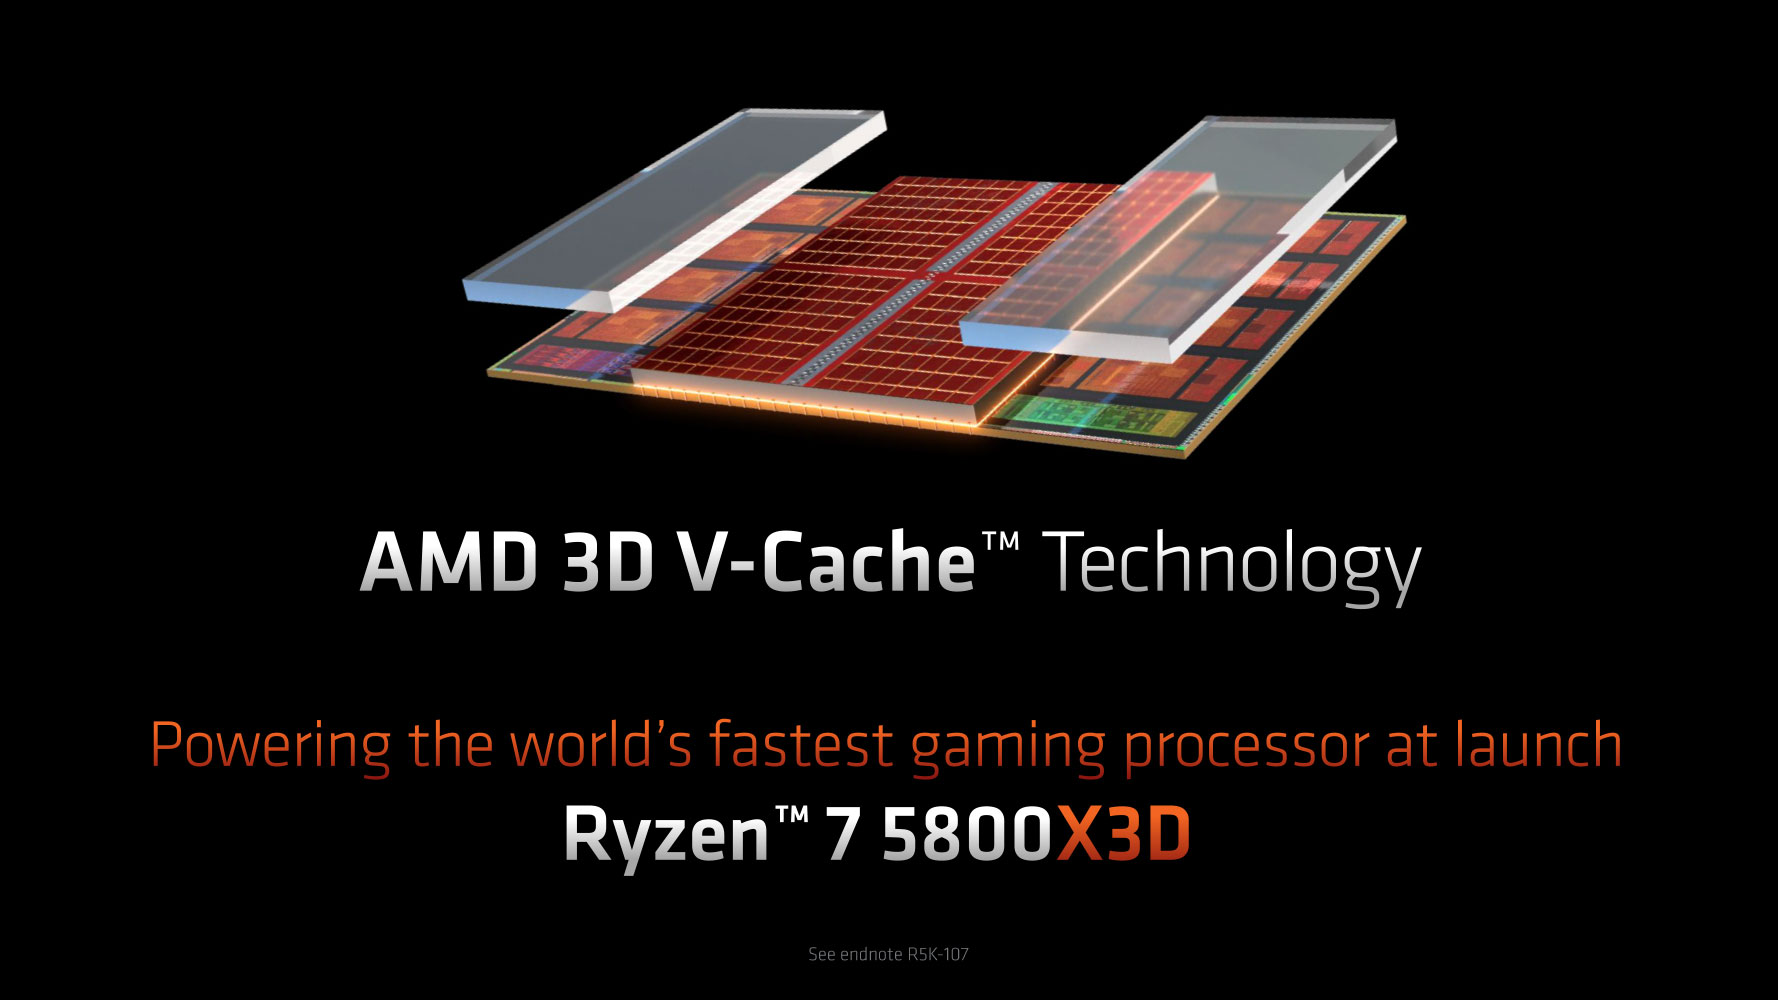 AMD Ryzen 7 7800X3D Review - The Best Gaming CPU - Architecture